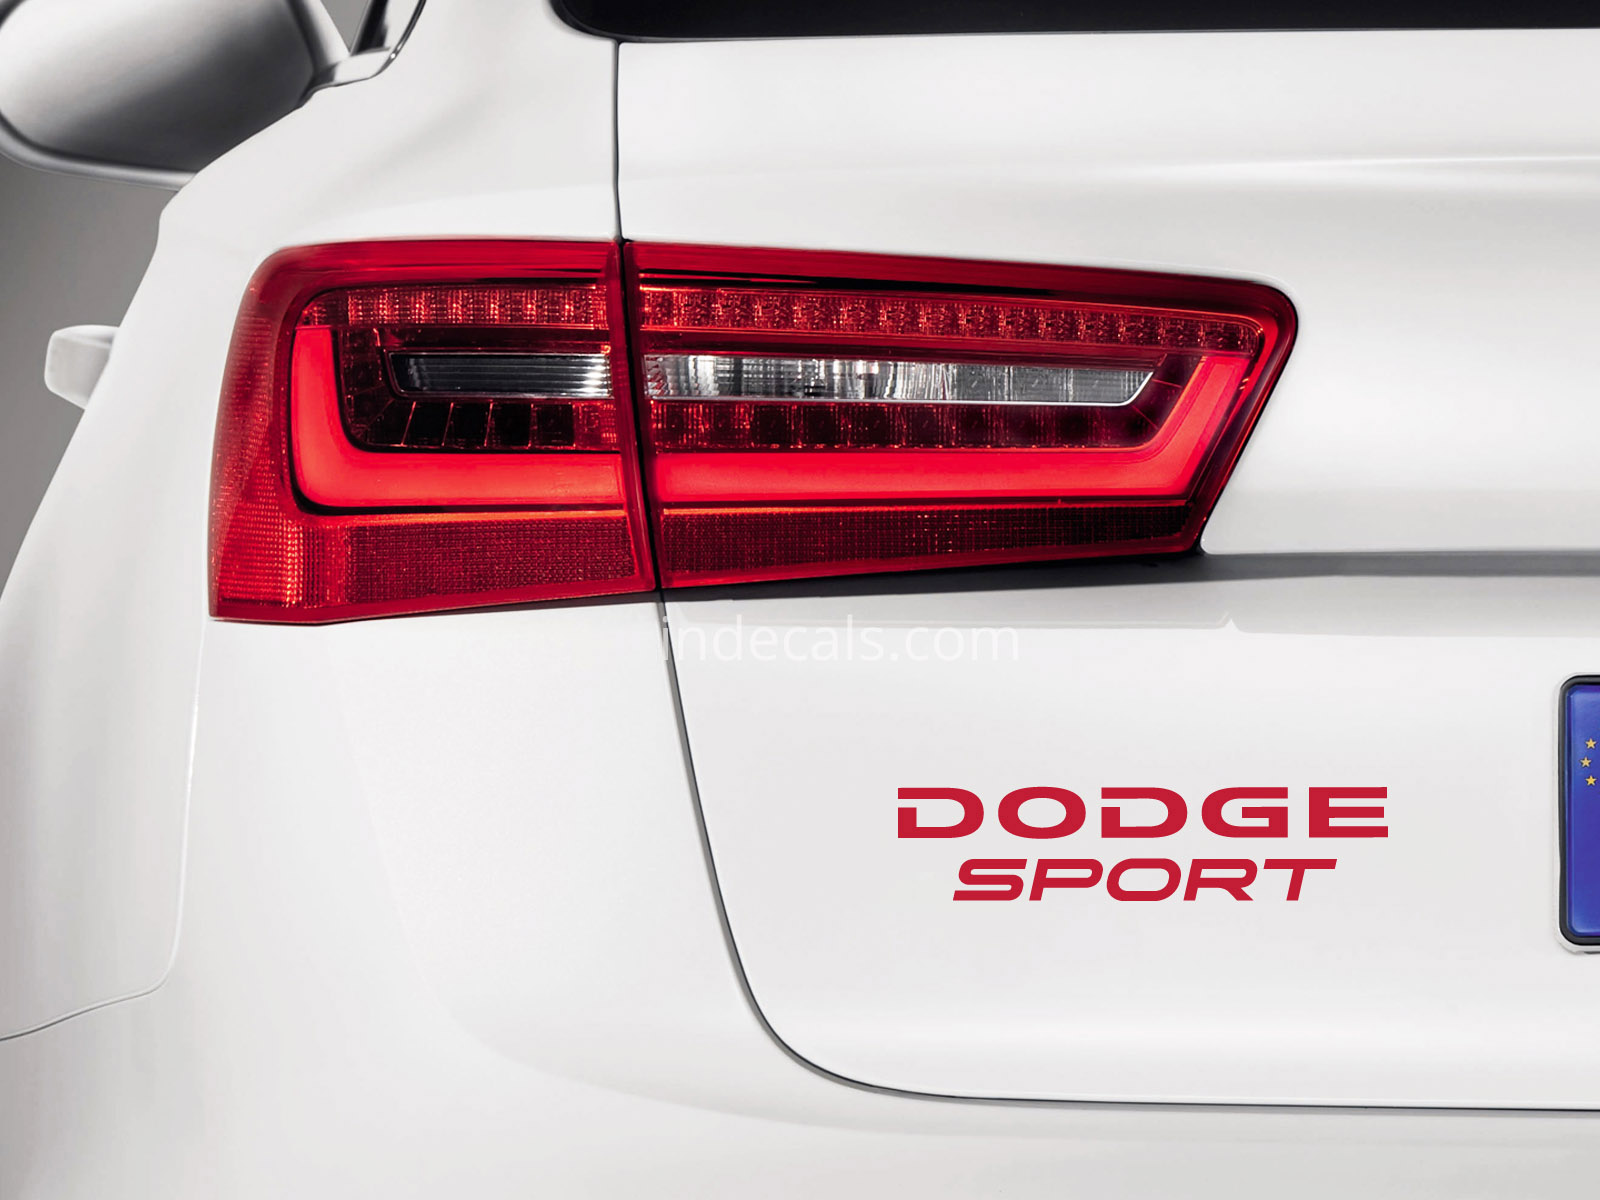 1 x Dodge Sports Sticker for Trunk - Red